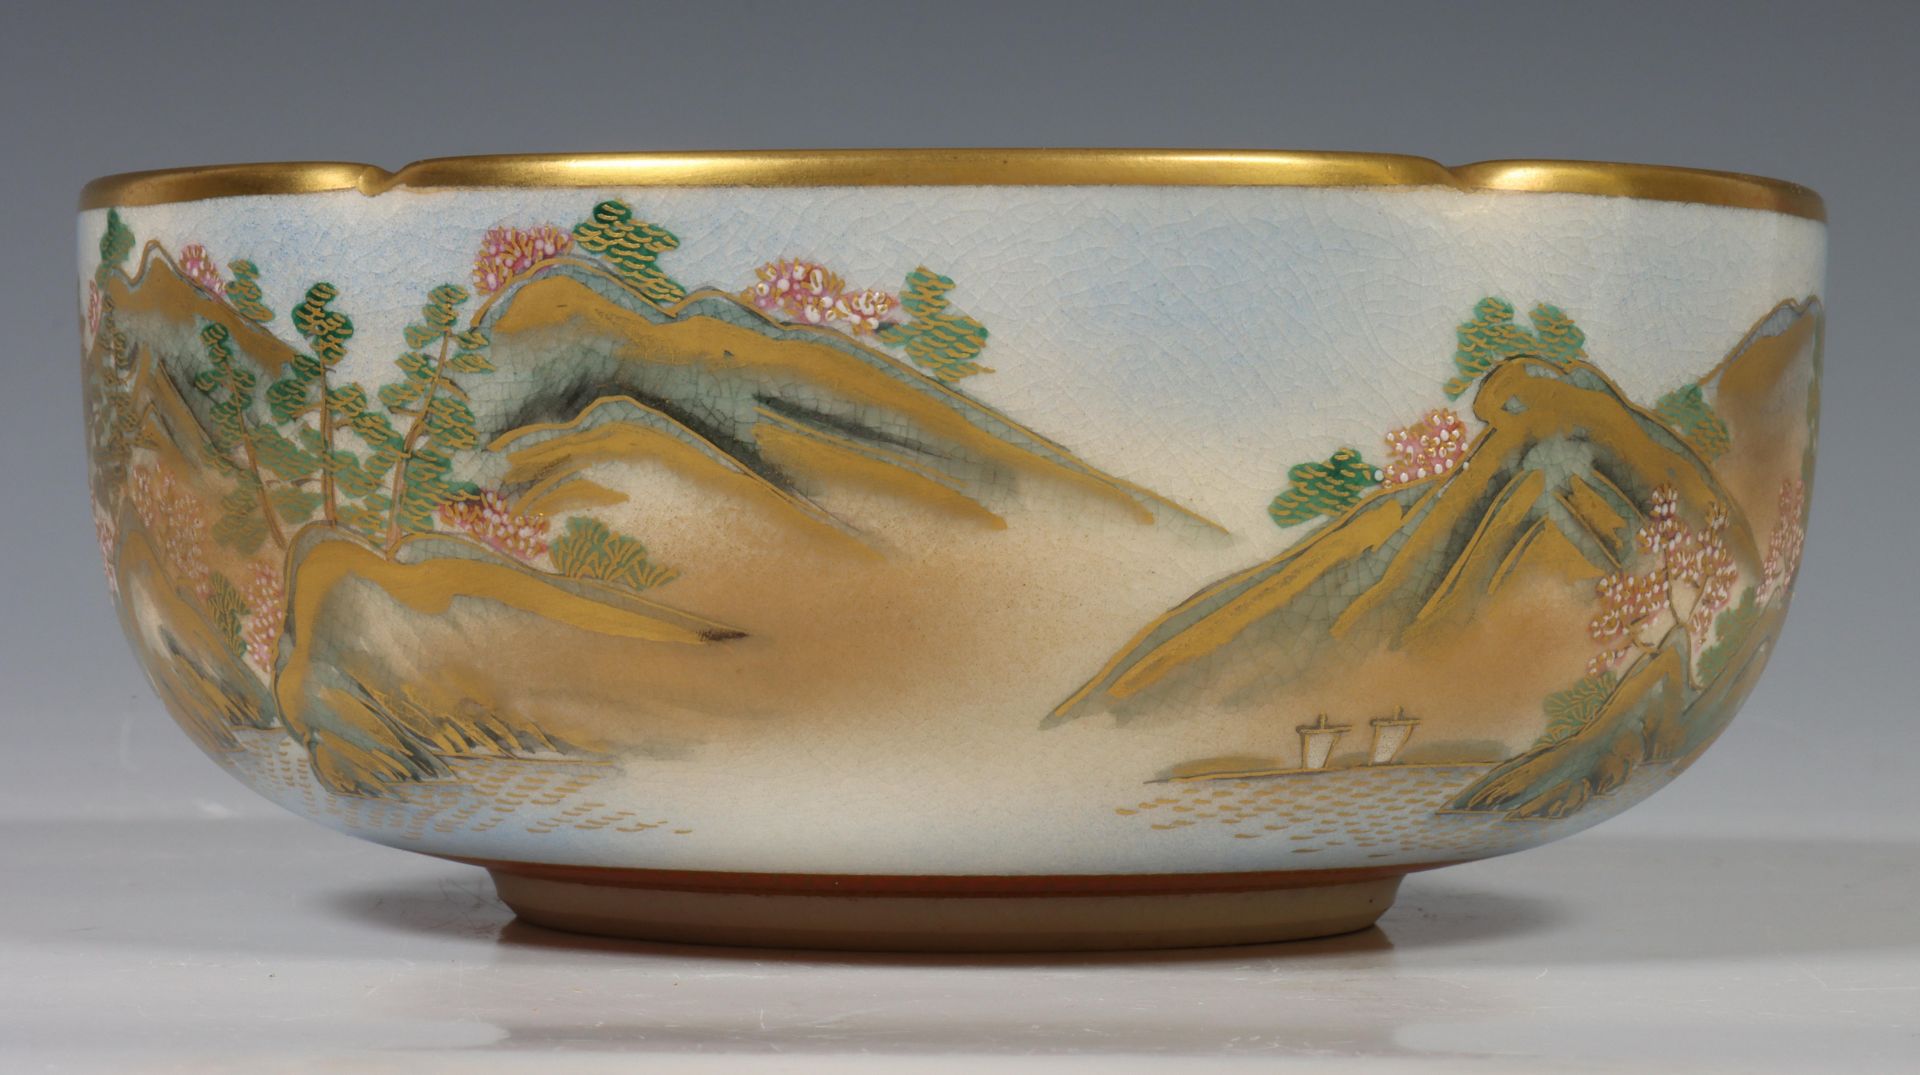 Japan, Satsuma porcelain bowl, 20th century, decorated to the interior with pavilion with mount Fuji - Image 3 of 8